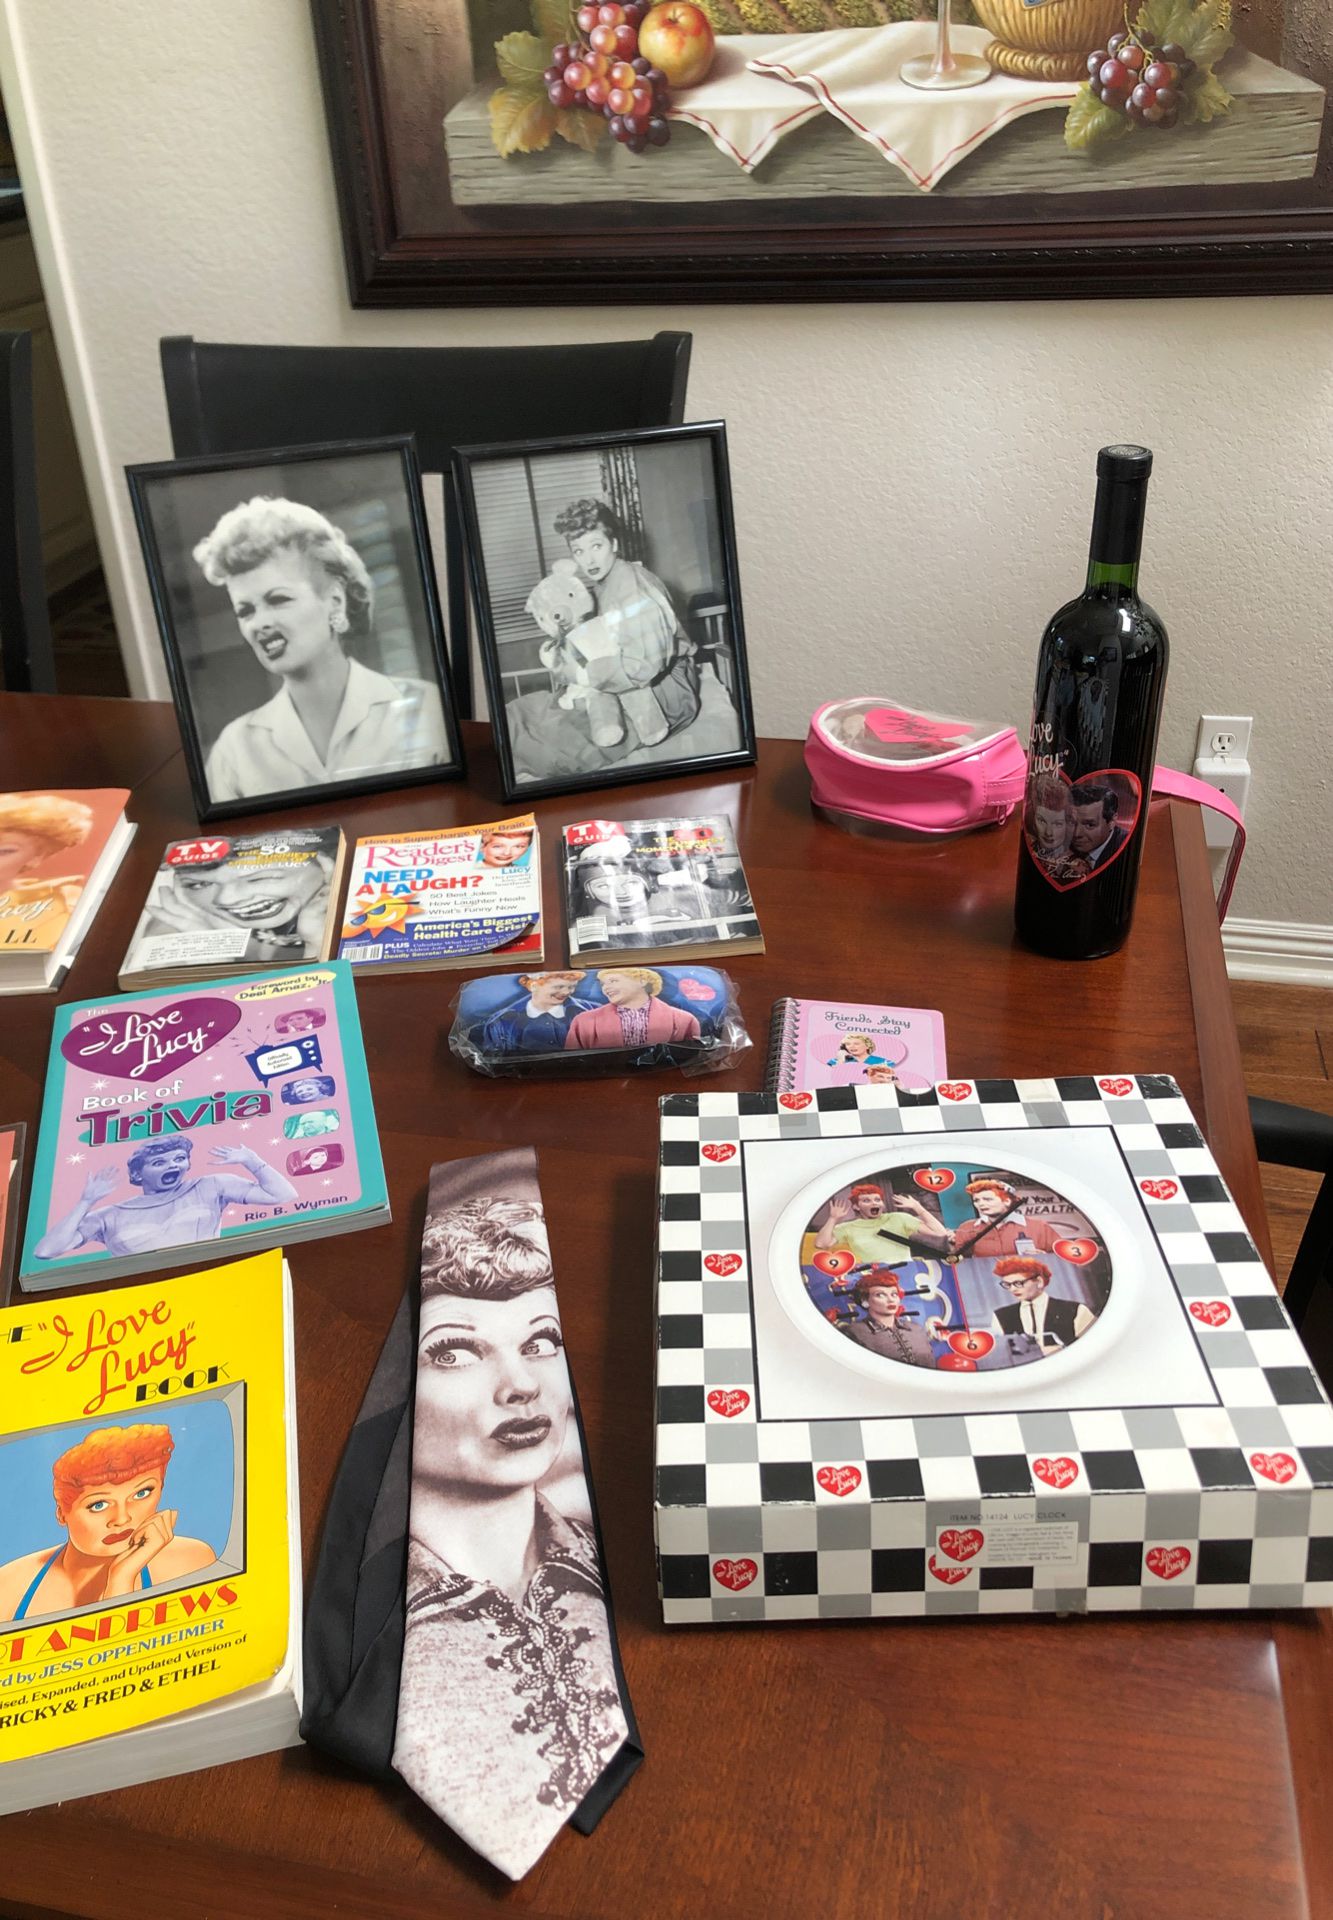 Lucille Ball items